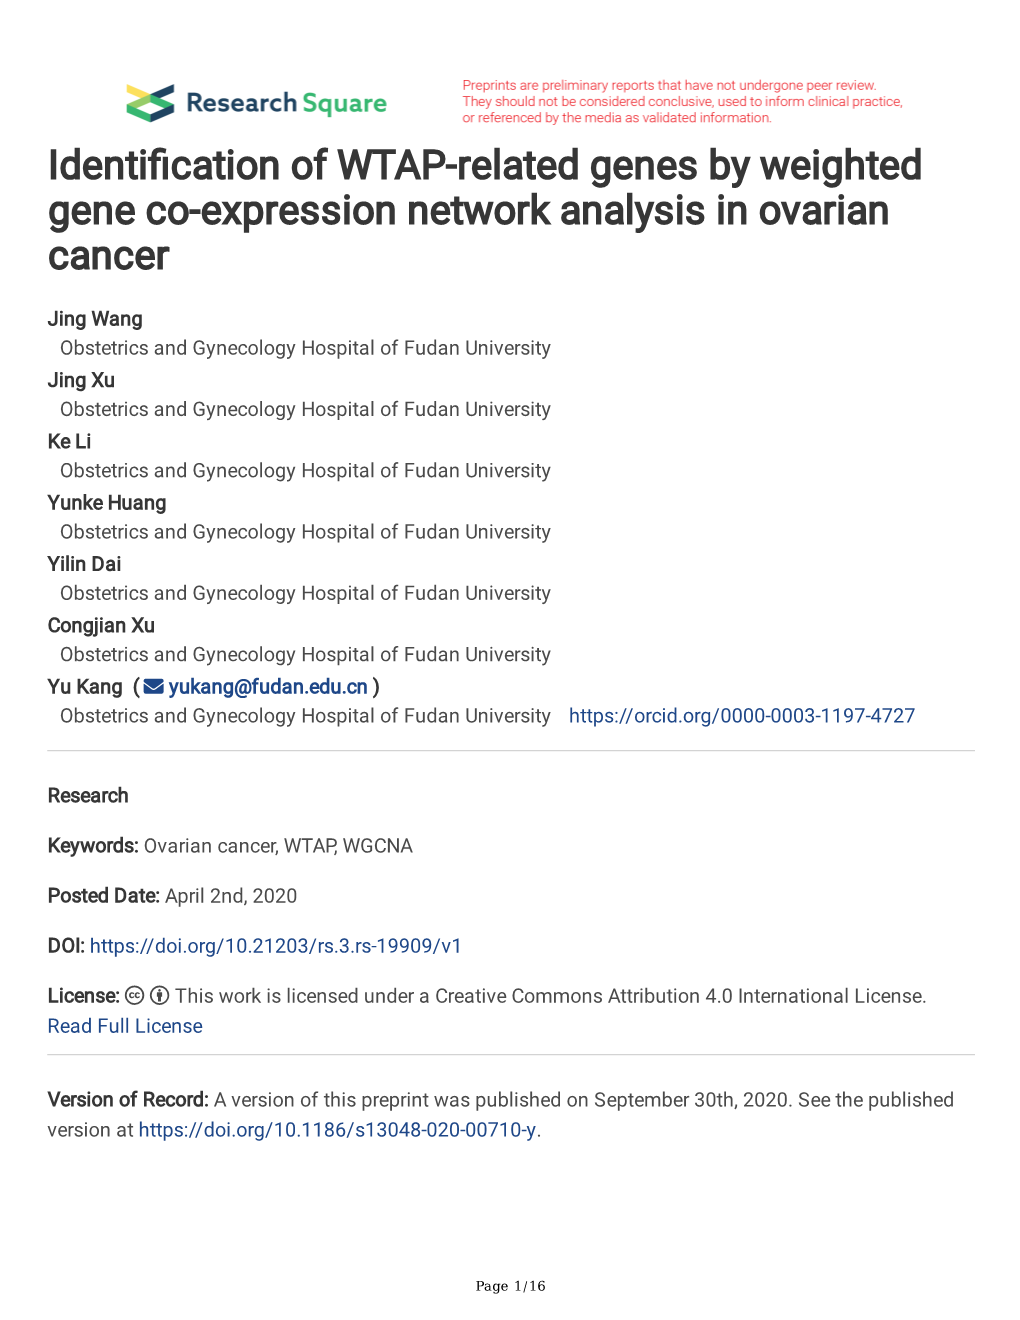 Identification of WTAP-Related Genes by Weighted